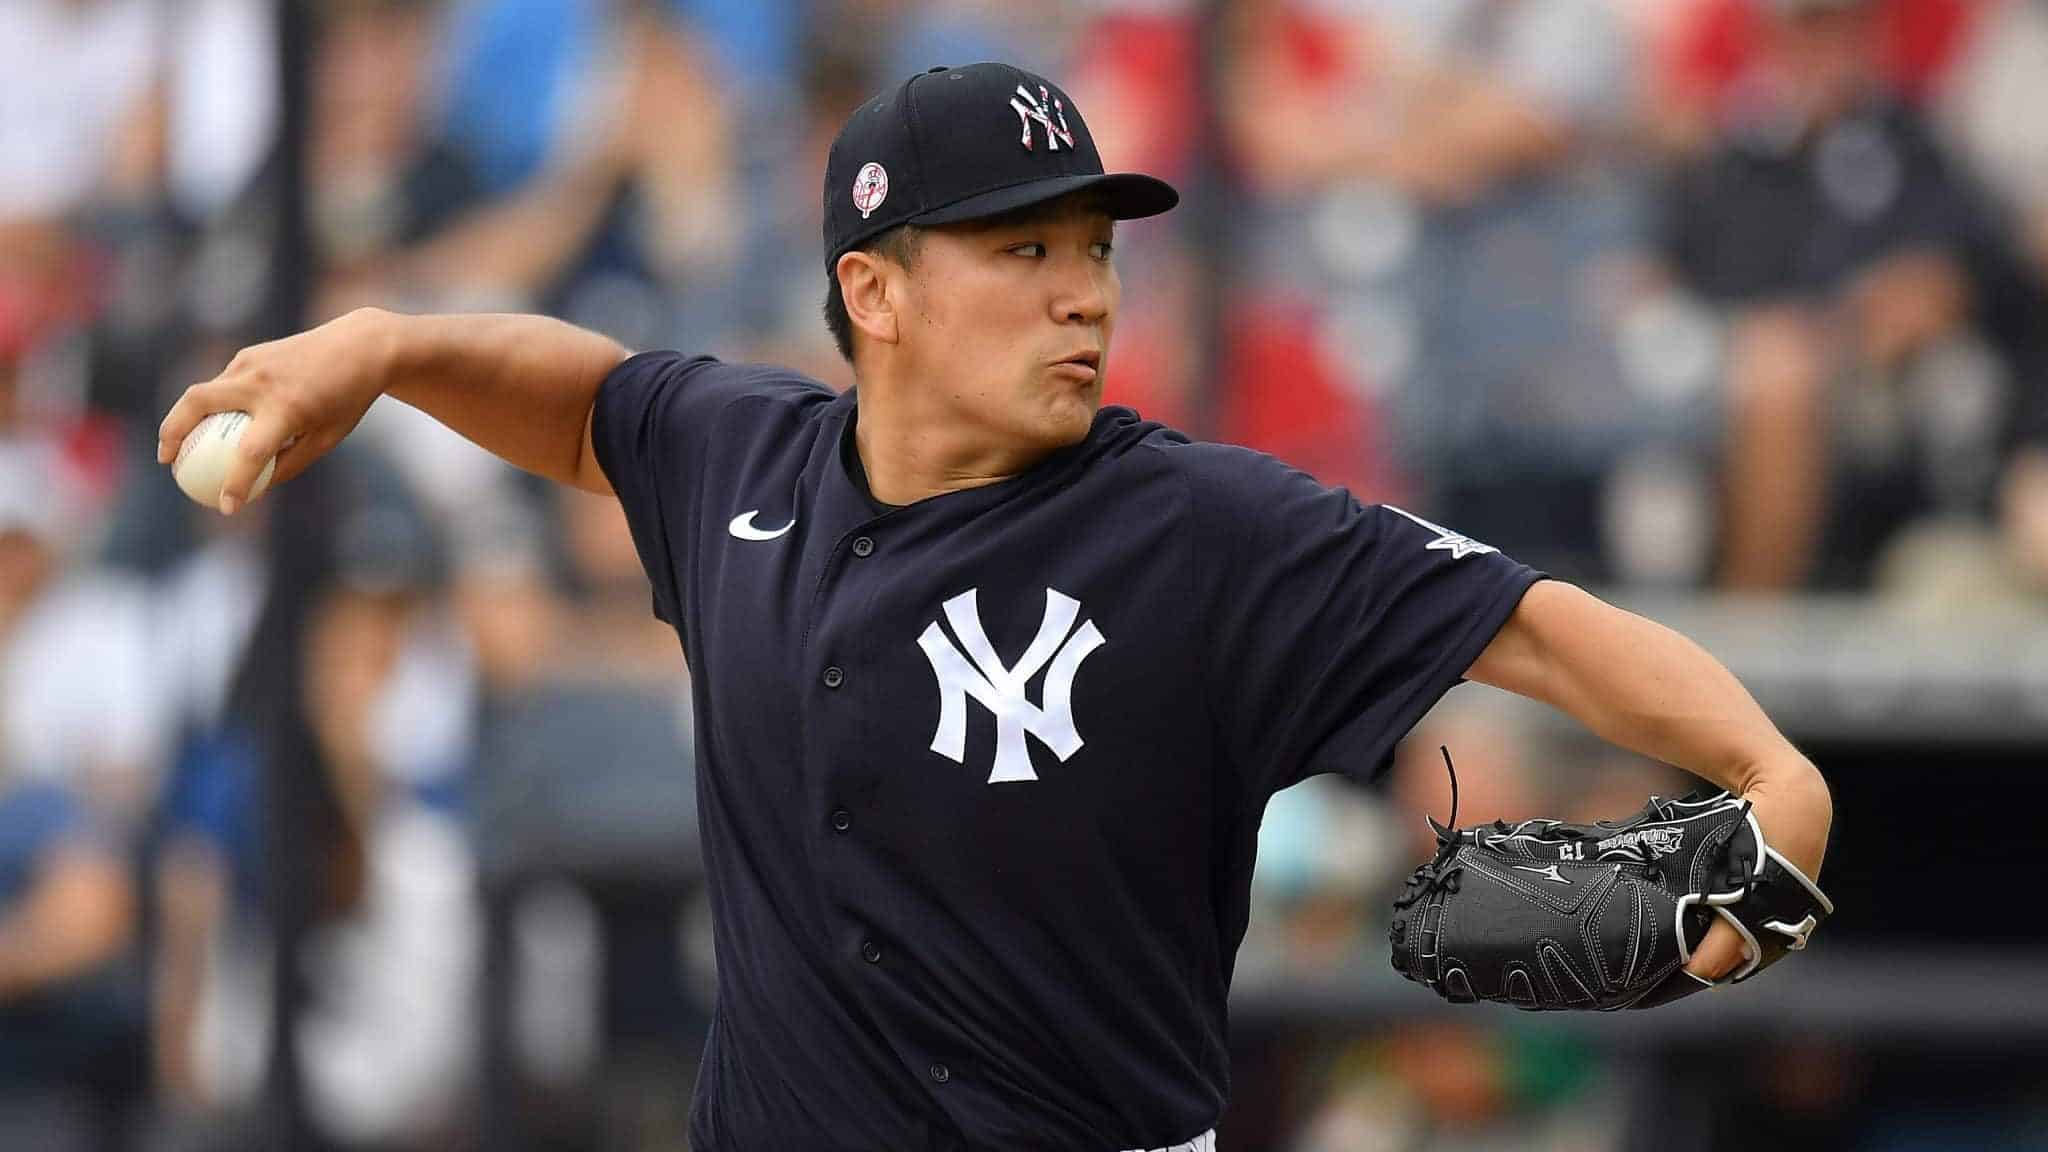 TAMPA, FLORIDA - FEBRUARY 26: Masahiro Tanaka #19 of the New York Yankees delivers a pitch in the second inning during the spring training game against the Washington Nationals at Steinbrenner Field on February 26, 2020 in Tampa, Florida.